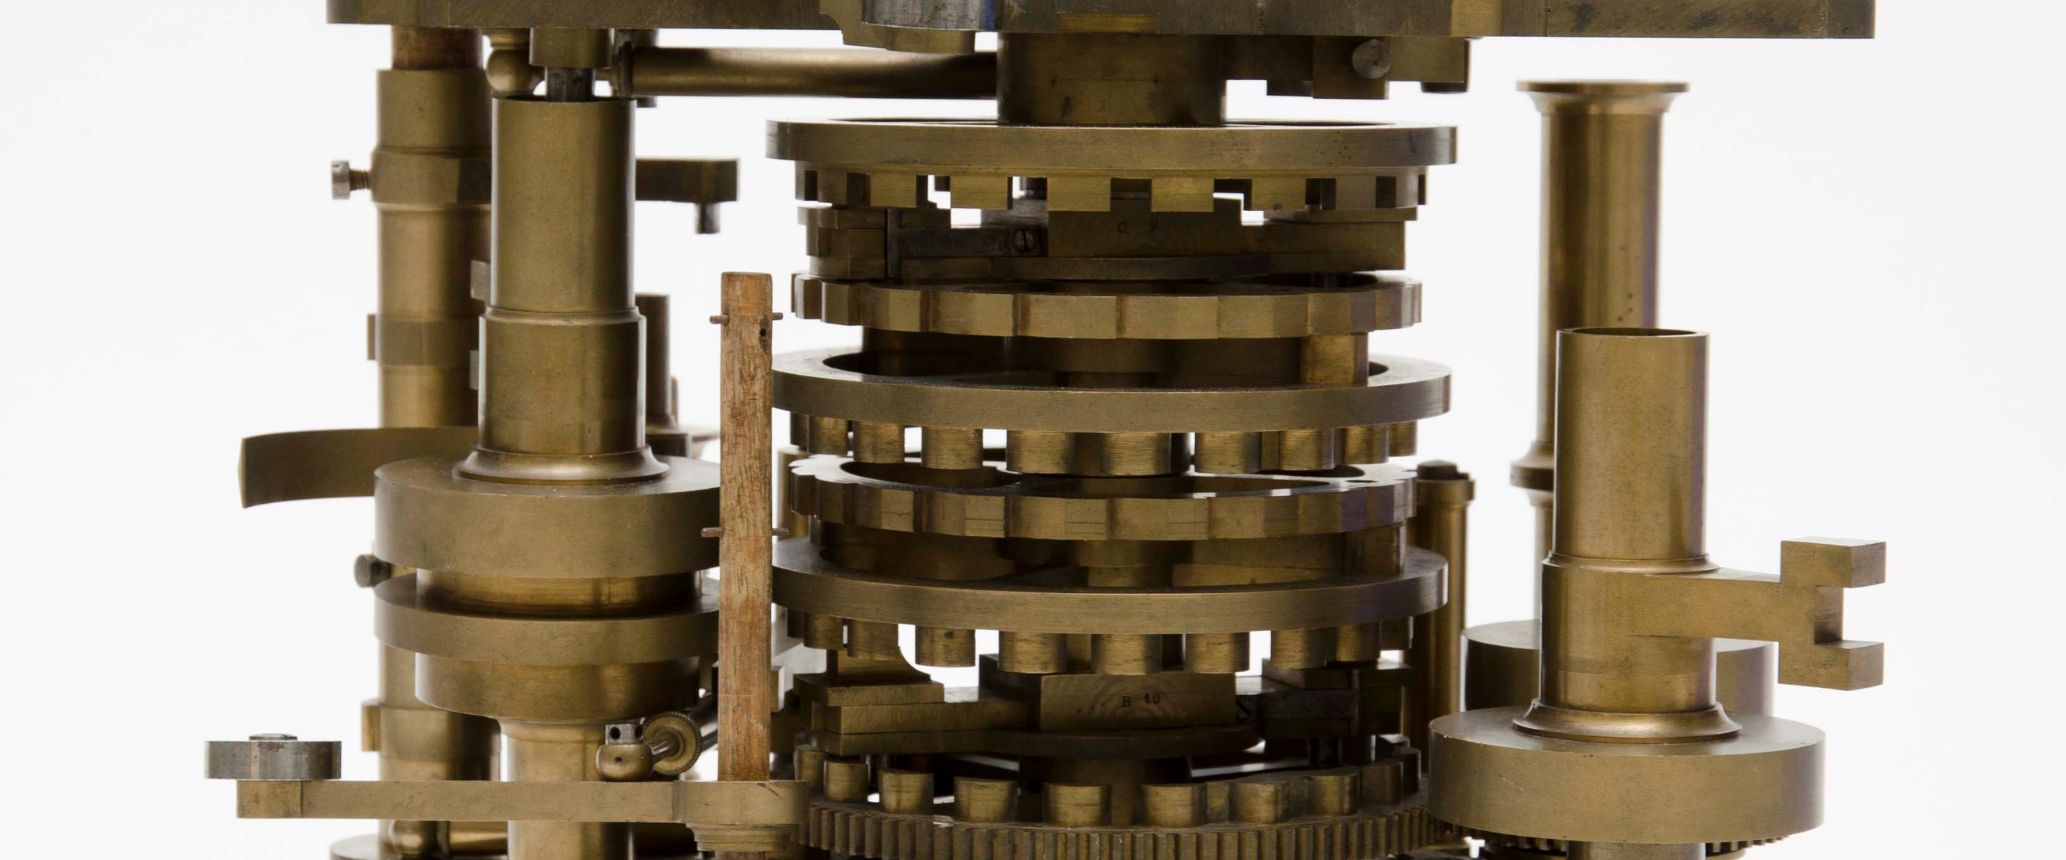 94229 Parts of Difference Engine, by Charles Babbage, c. 1822-30